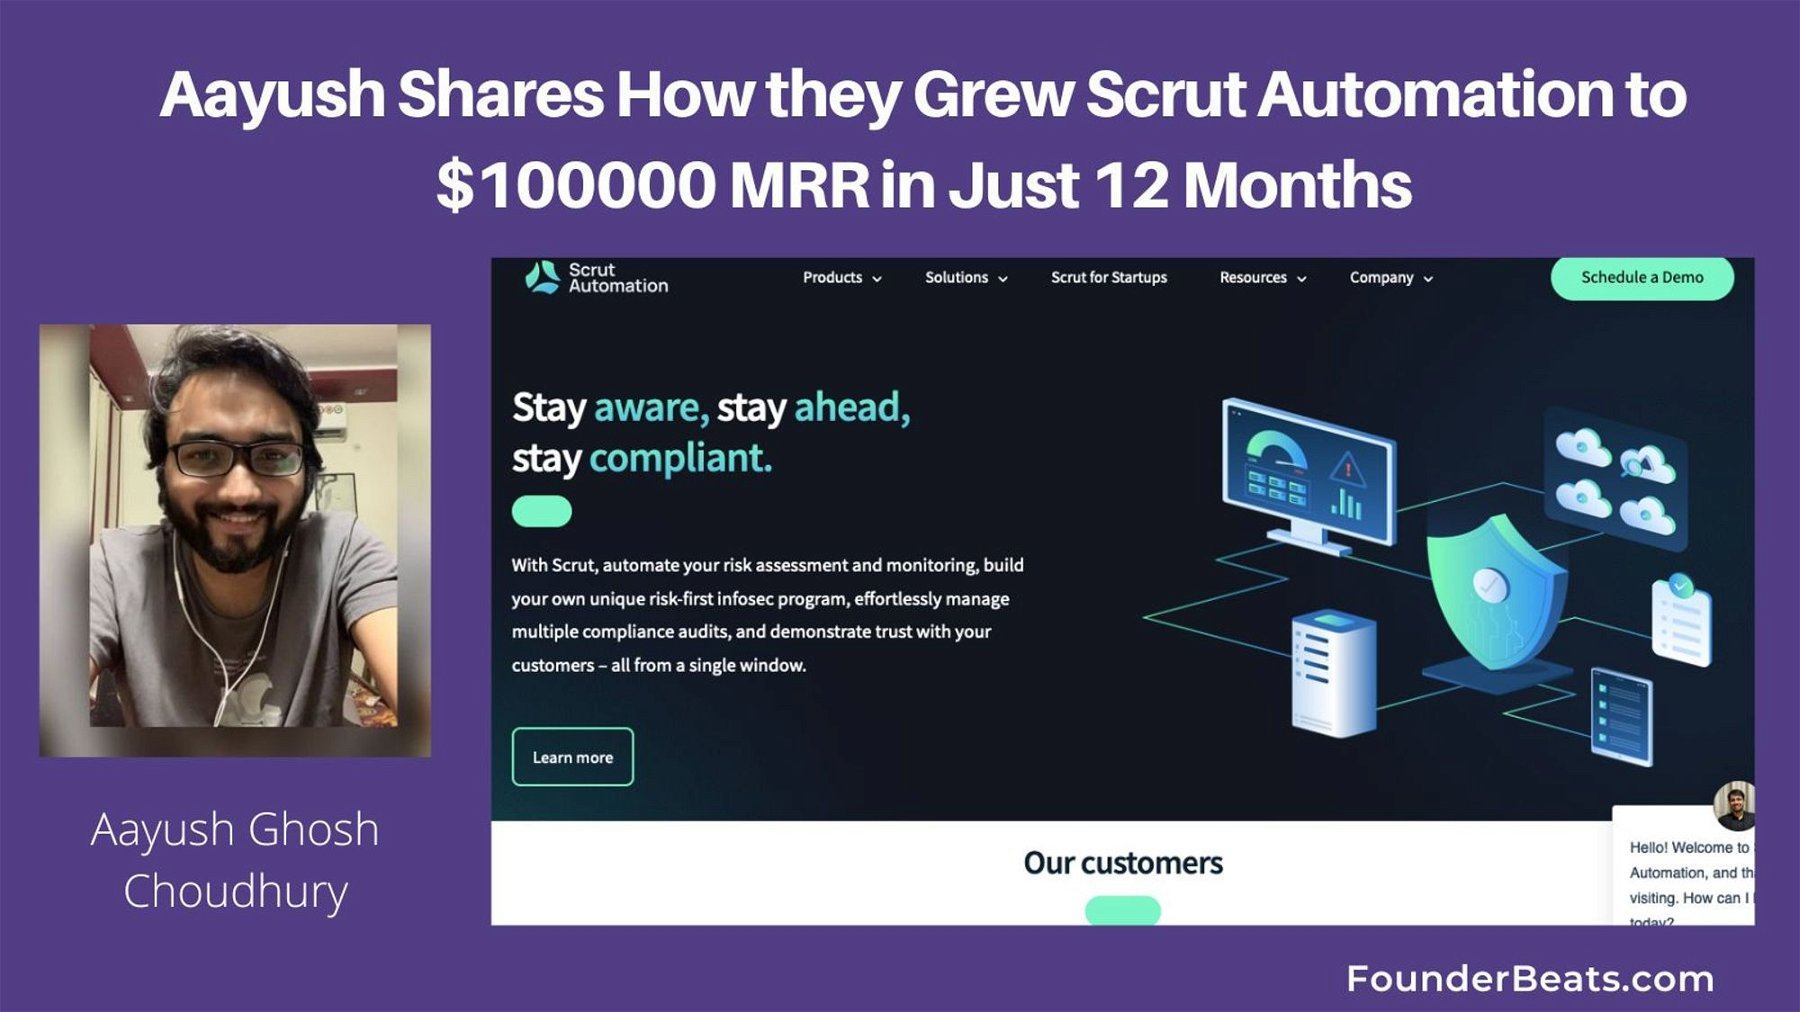 Aayush Shares How they Grew Scrut Automation to $100000 MRR in Just 12 Months